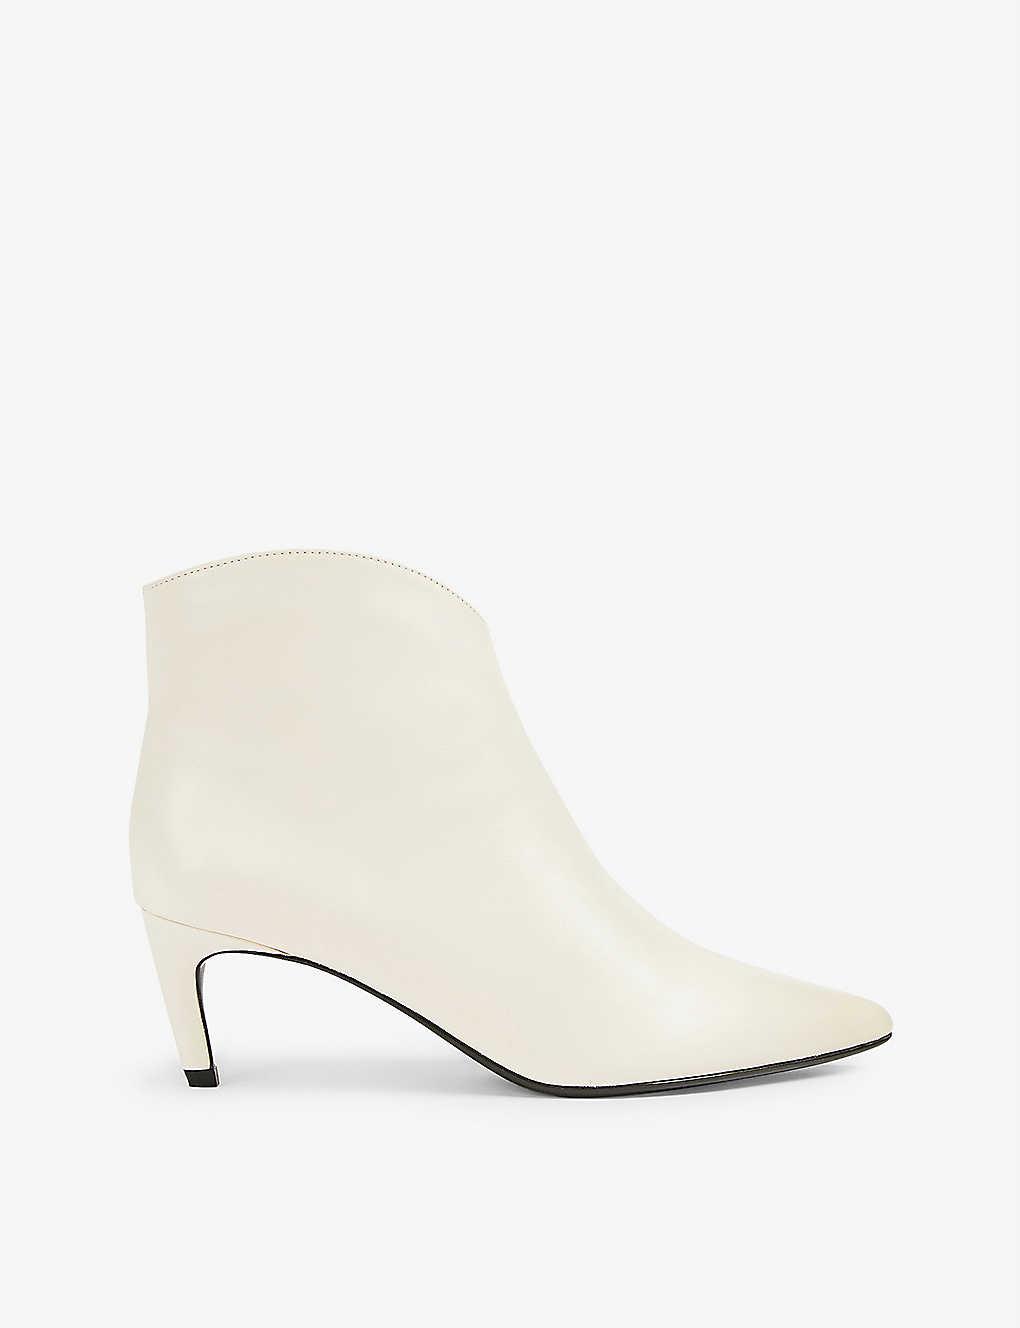 Ted Baker Galiana Stiletto Leather Ankle Boots in Natural | Lyst